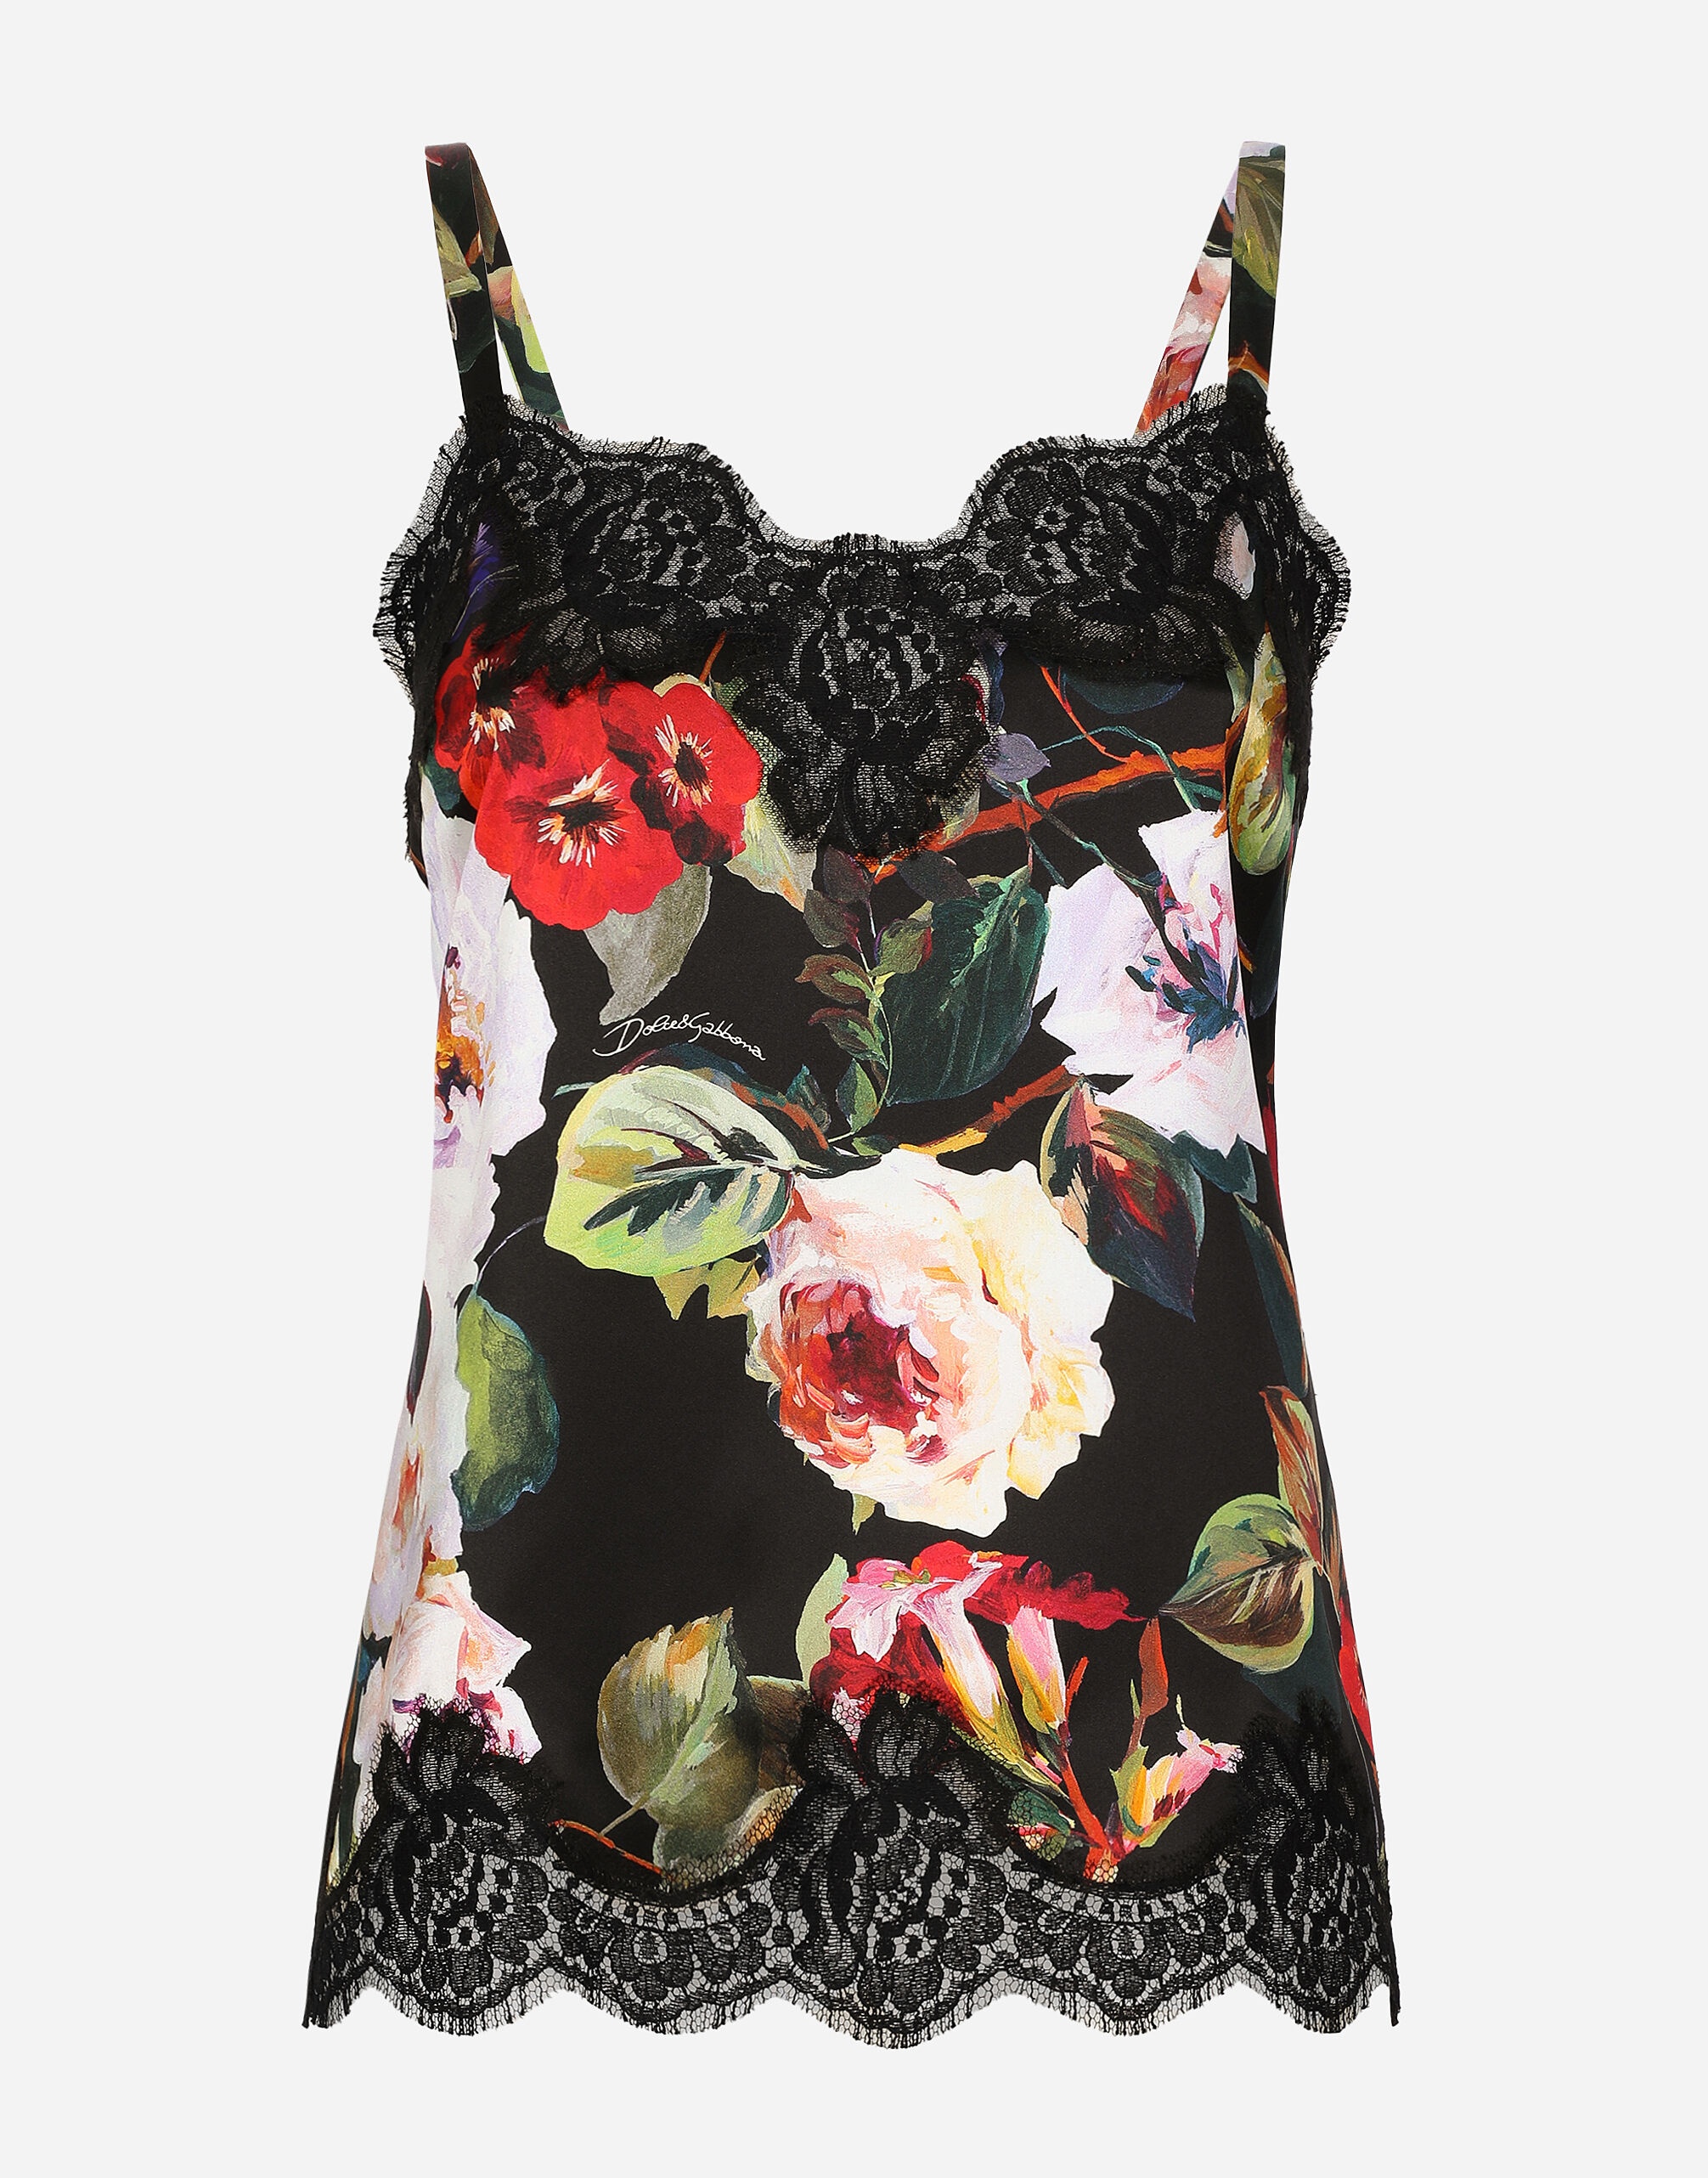 Satin lingerie-style top with rose garden print and lace detailing - 1